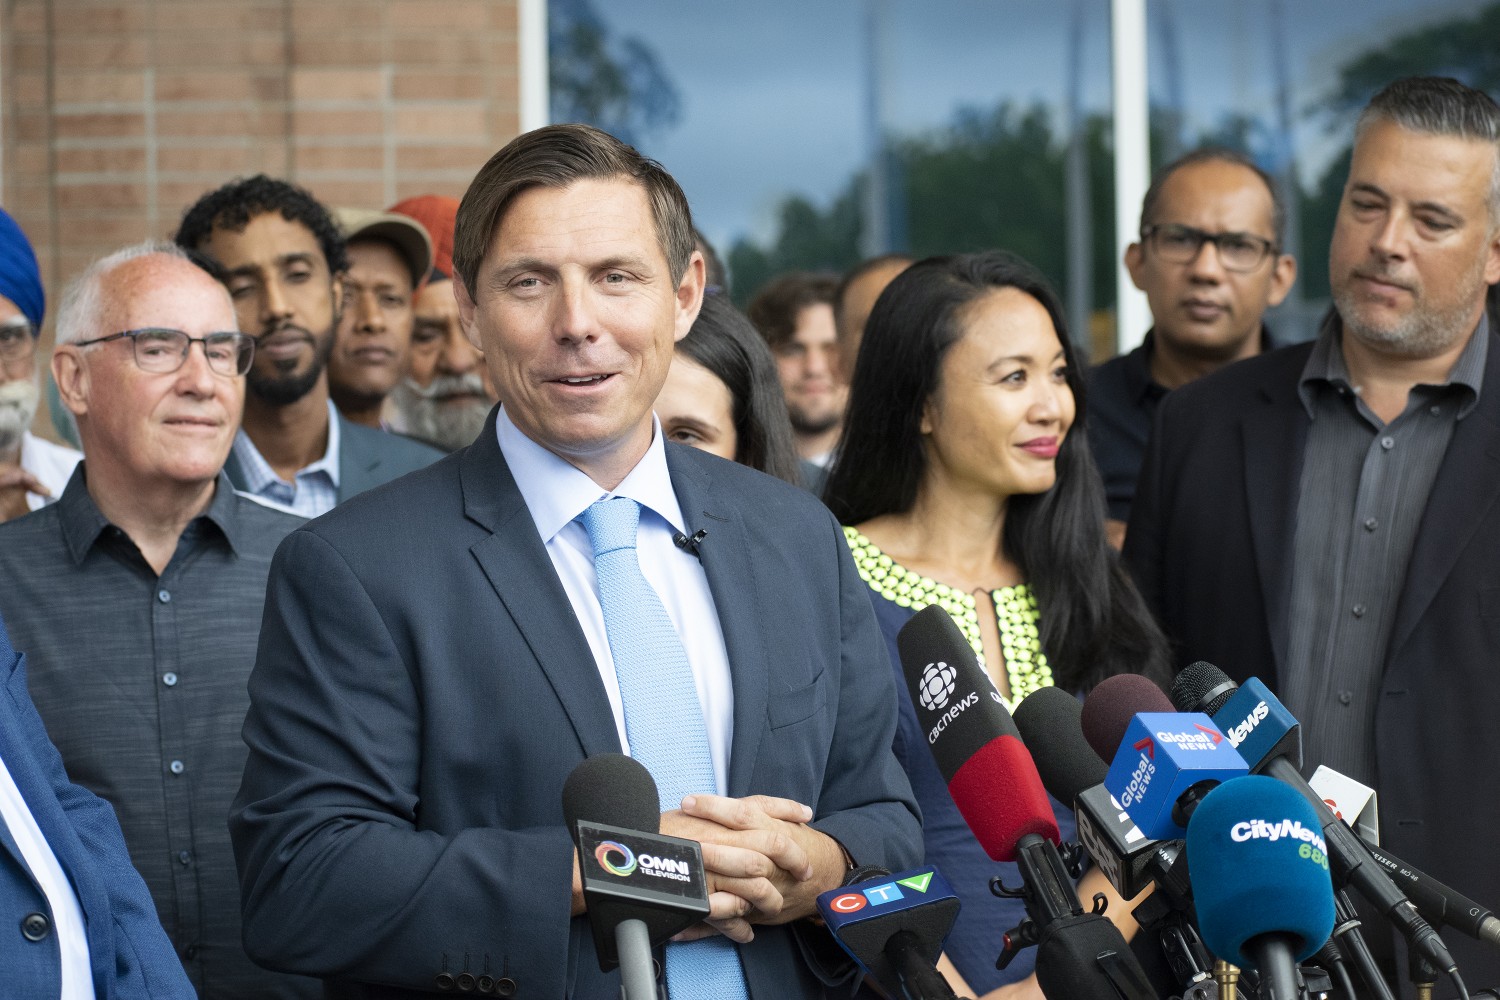 Patrick Brown keeps scheduling snap council meetings that can’t take place, after cancelling them for a month; critical City business stalled